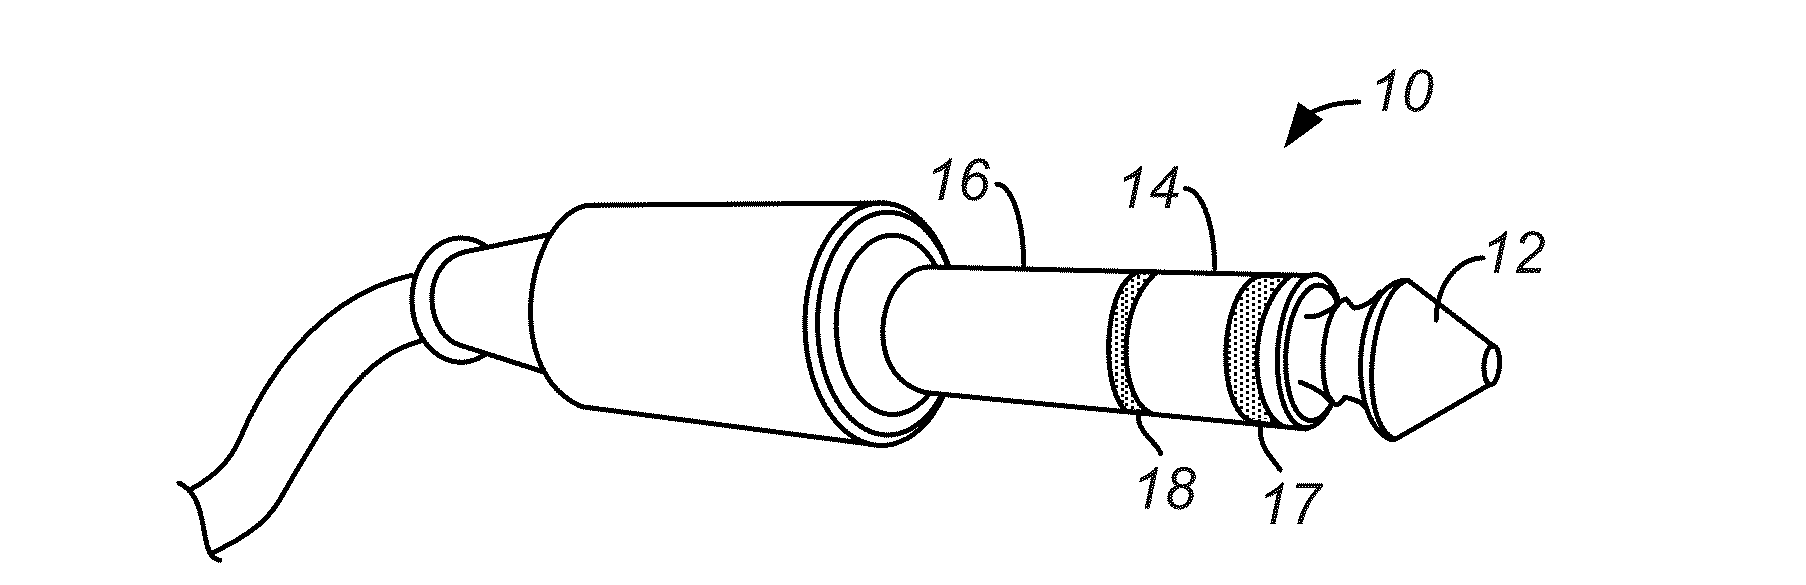 Conductive frame for an electrical connector